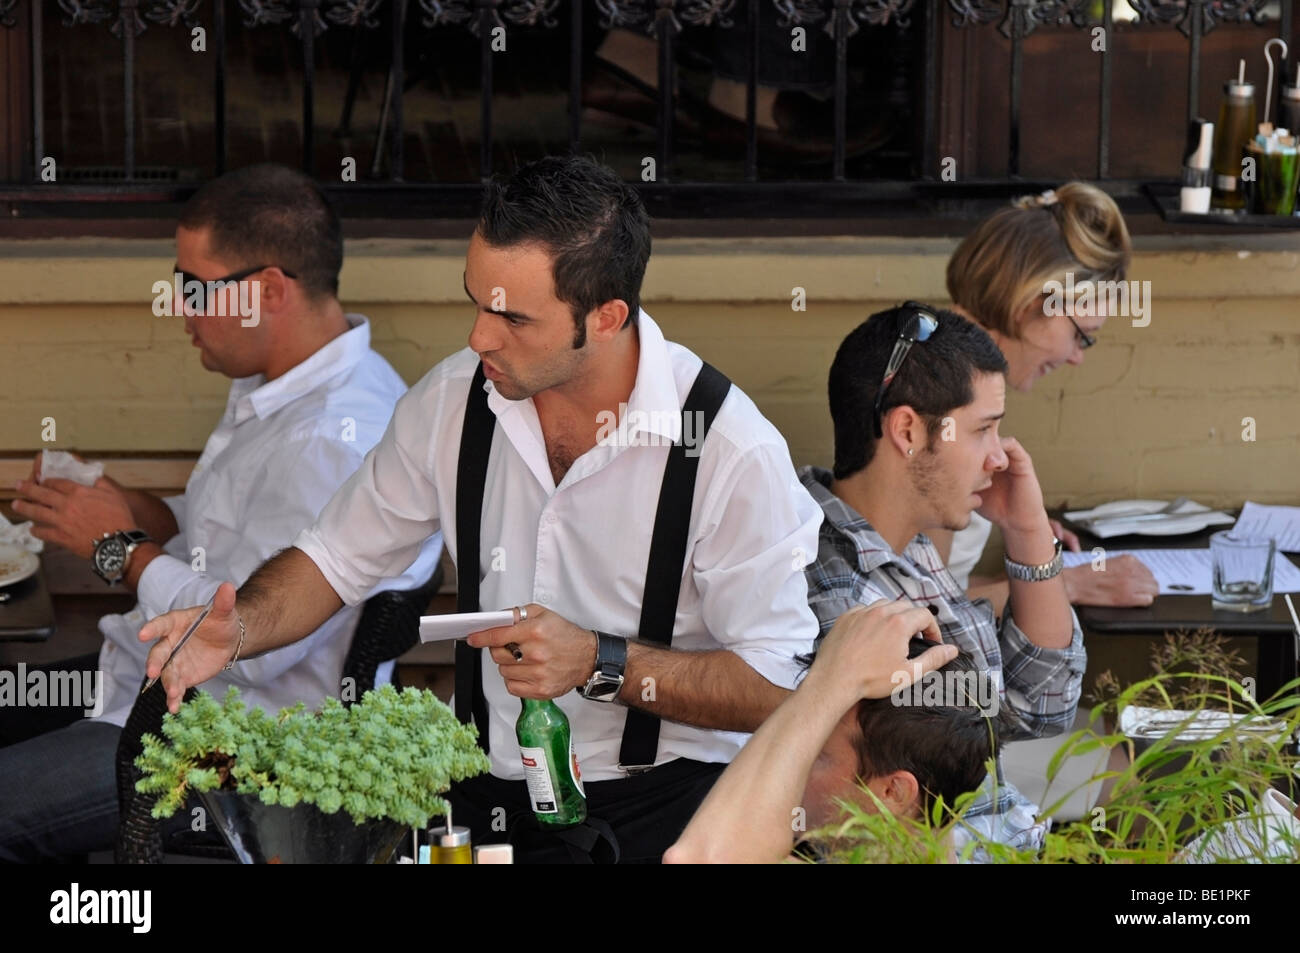 People dining/lunching outdoors Stock Photo